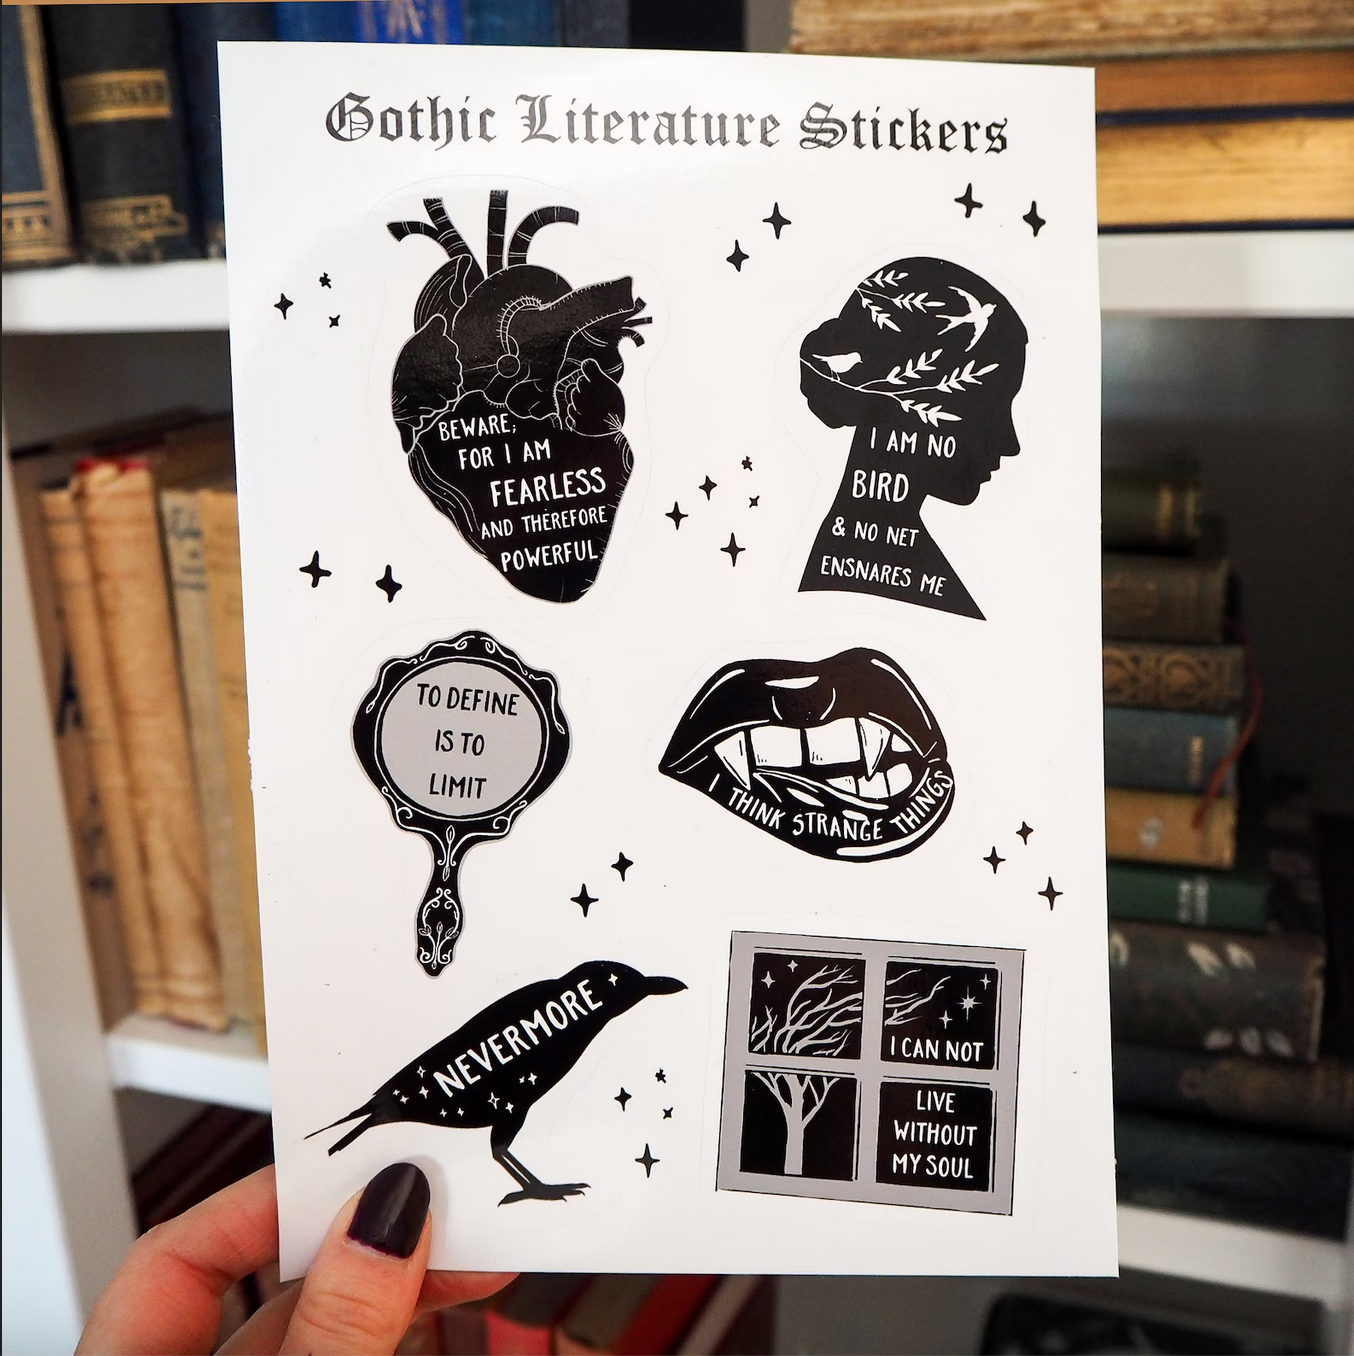 An array of black-and-white stickers with images and quotes from gothic literature.